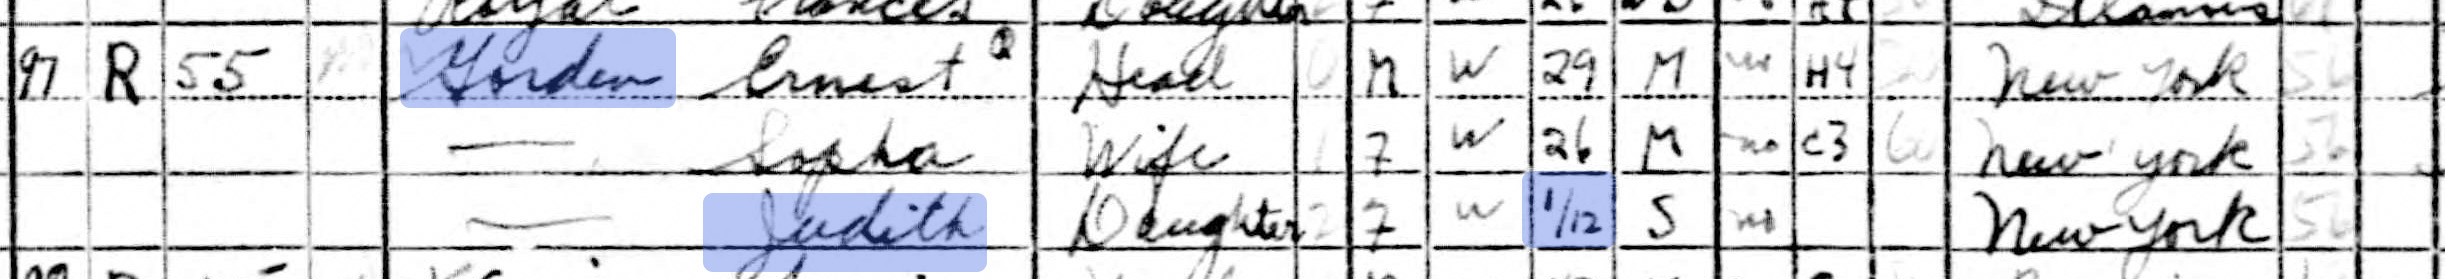 census sheet excerpt showing Judith Gordon, as well as Ernest and Sophia